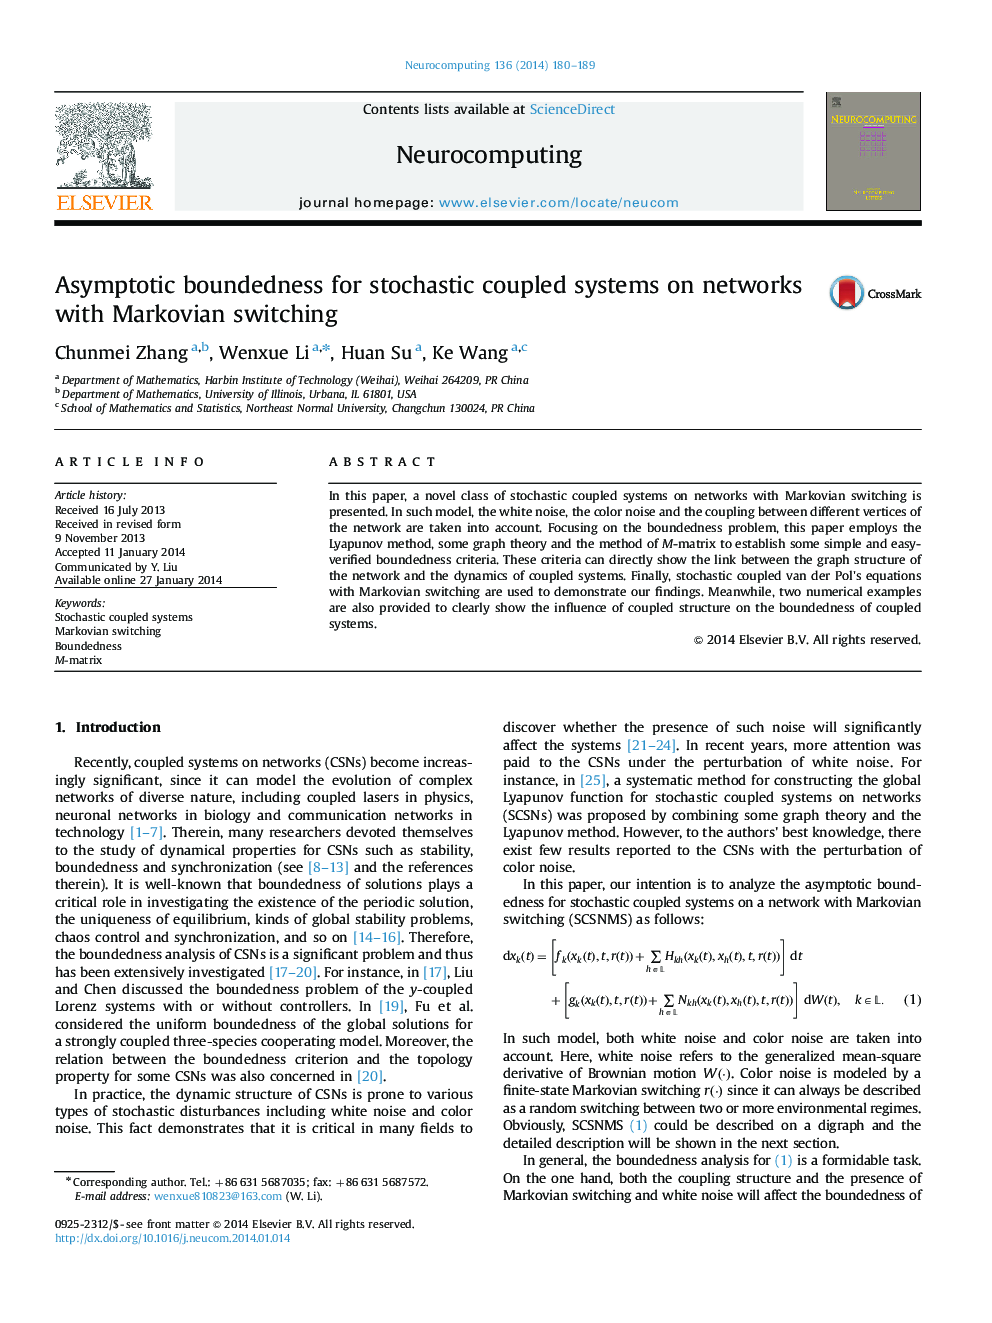 Asymptotic boundedness for stochastic coupled systems on networks with Markovian switching